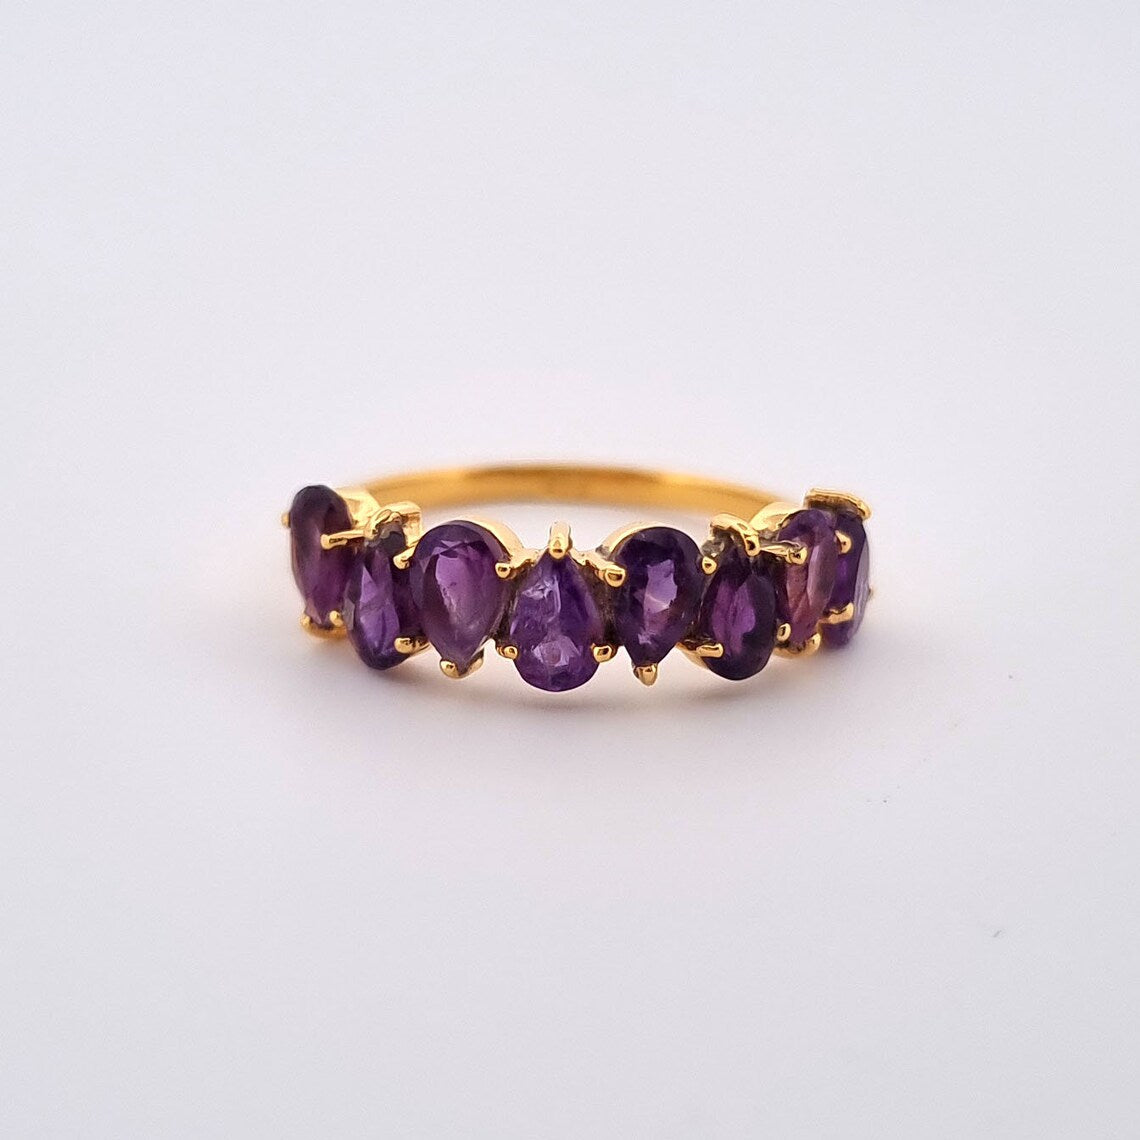 Gold Plated on 925 Sterling Silver - Amethyst Ring - February Birthstone Ring - promise ring, wedding ring, friendship ring